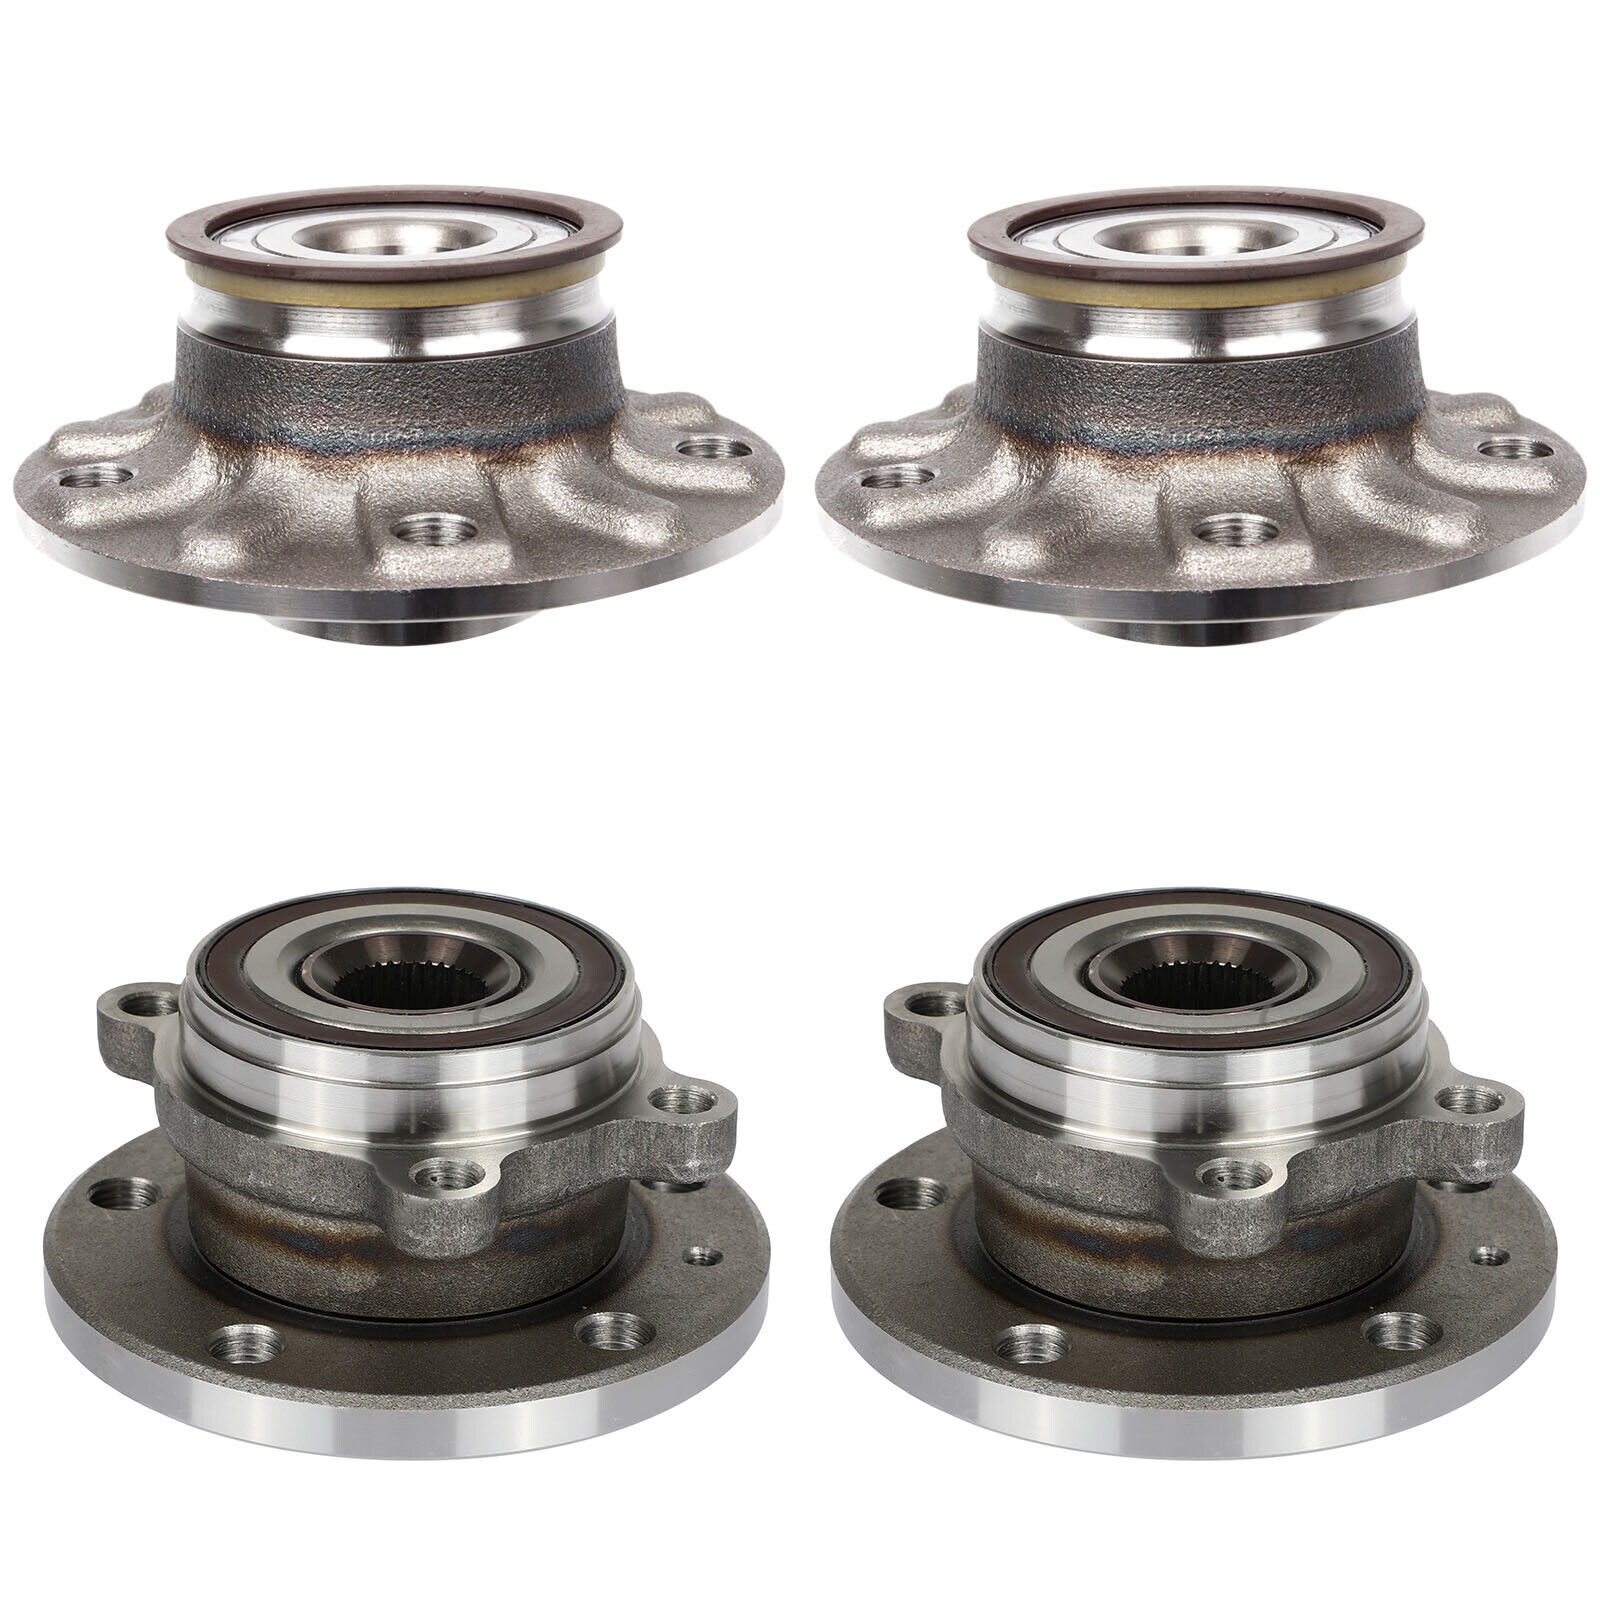 4x Front Rear Wheel Bearing Hub Assembly For Audi A3 Volkswagen Beetle Rabbit